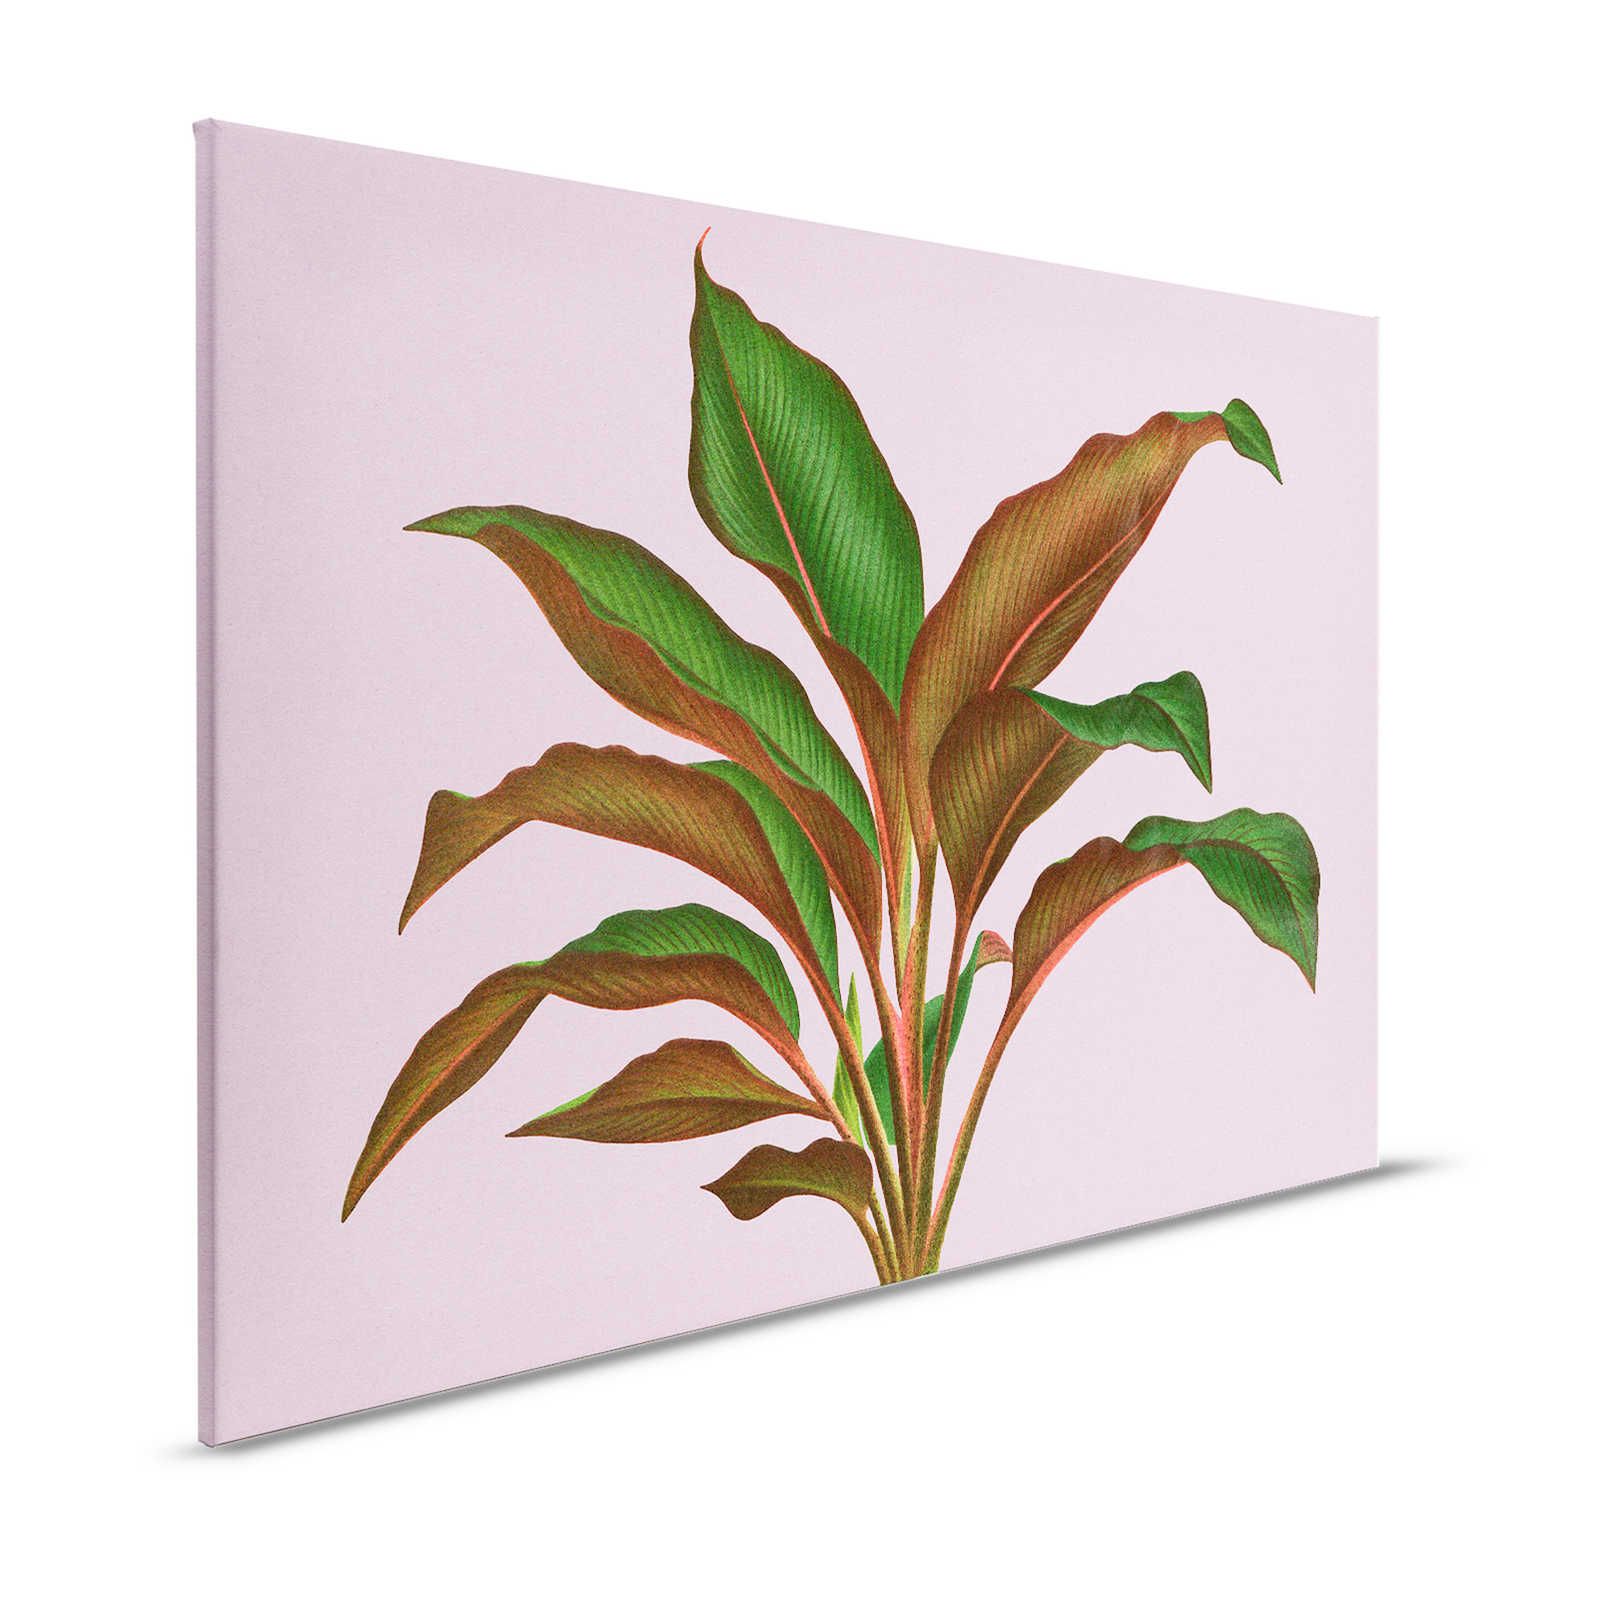 Leaf Garden 3 - Leaves Canvas painting Pink with tropical fern leaf - 1.20 m x 0.80 m
